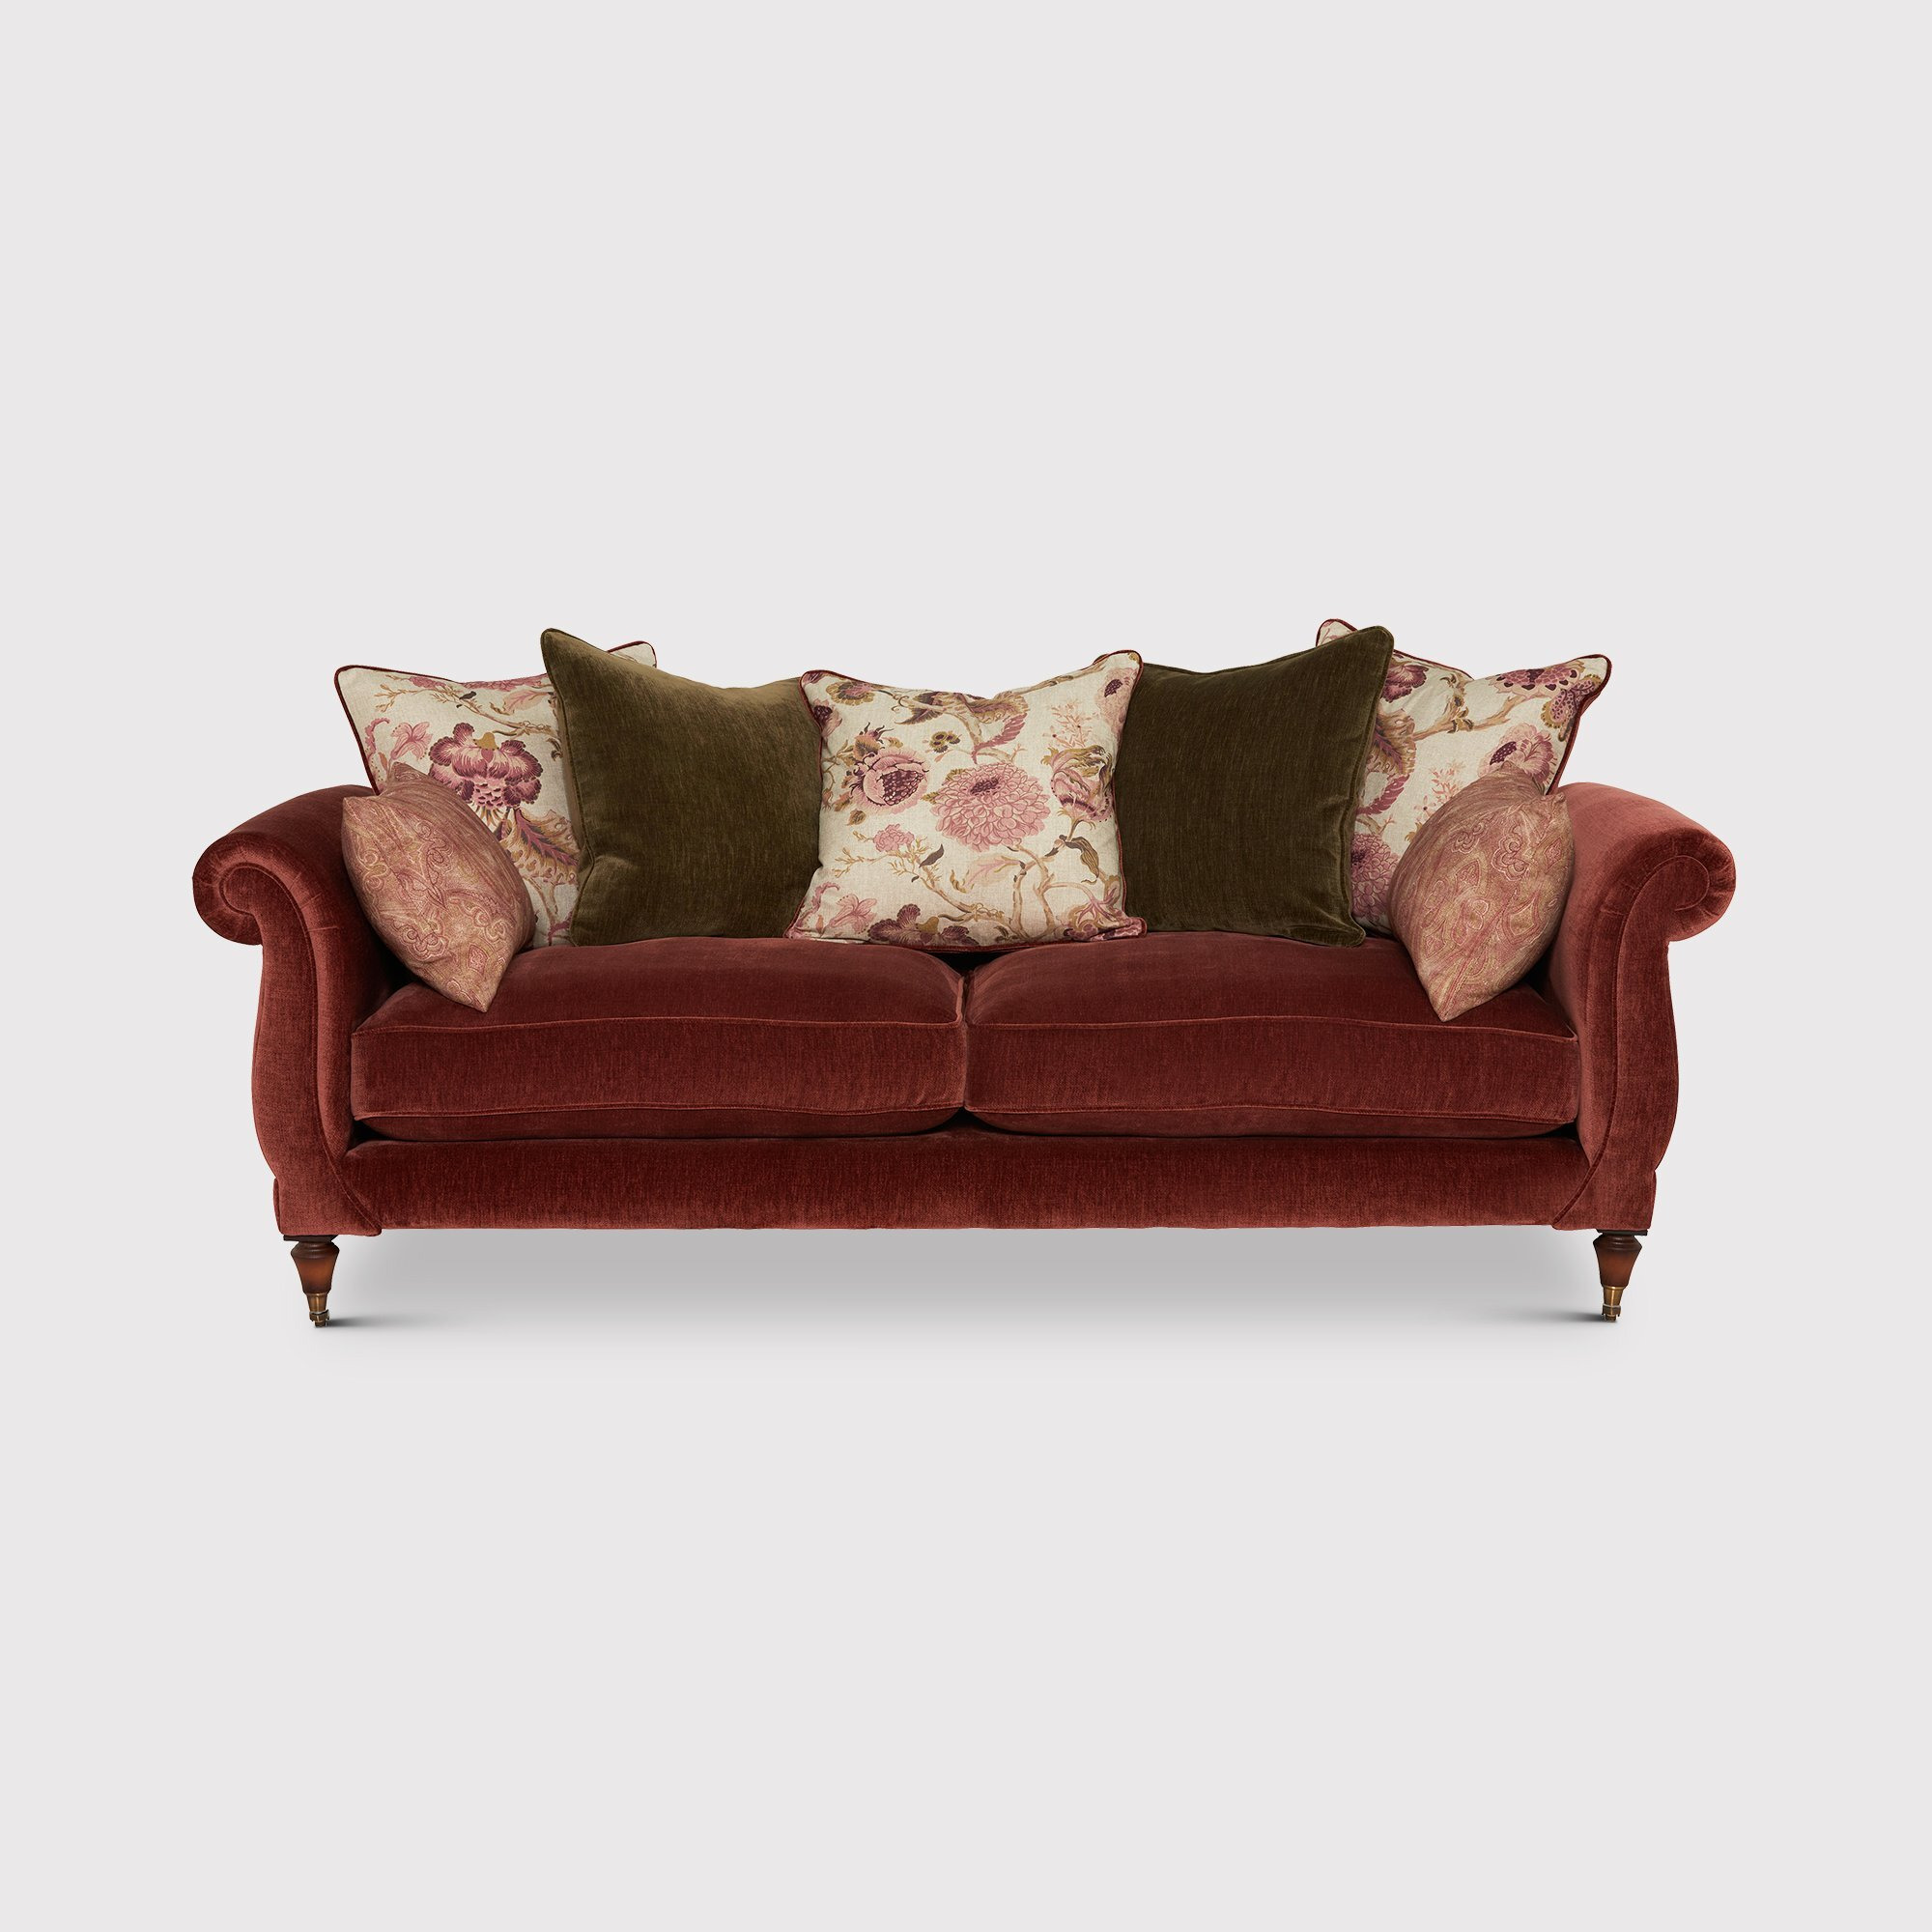 Atherton 4 Seater Sofa, Red Fabric - Barker & Stonehouse - image 1